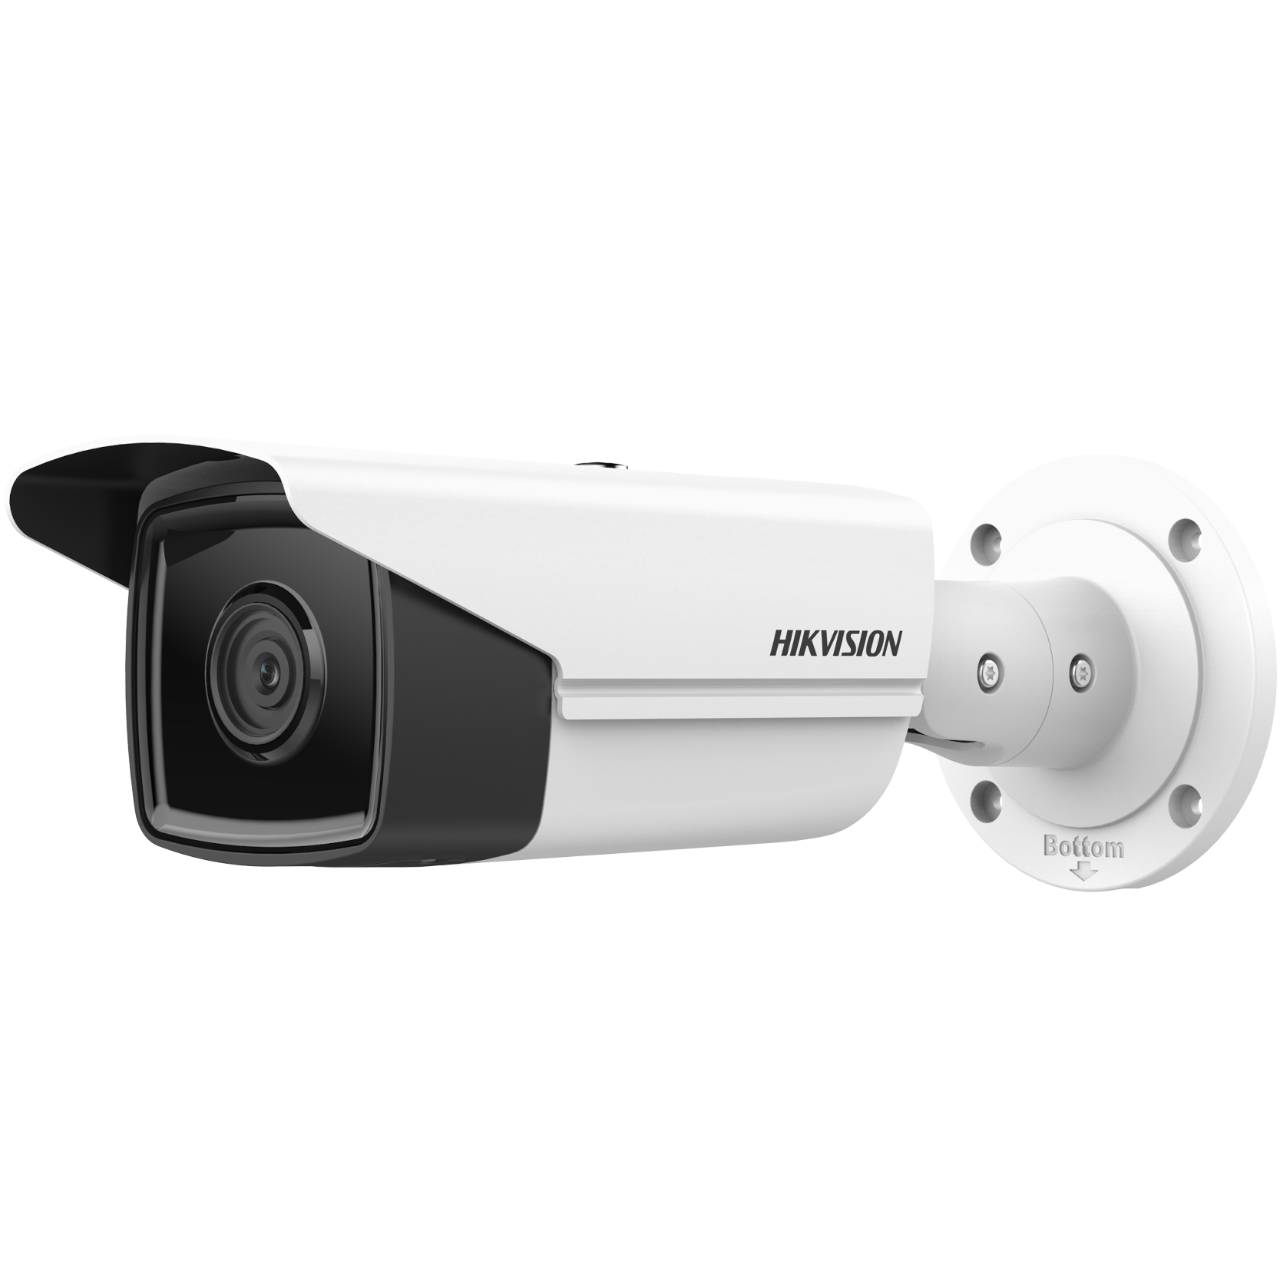 Hikvision DS-2CD2T83G2-4I 8 MP AcuSense Fixed Bullet Network Camera